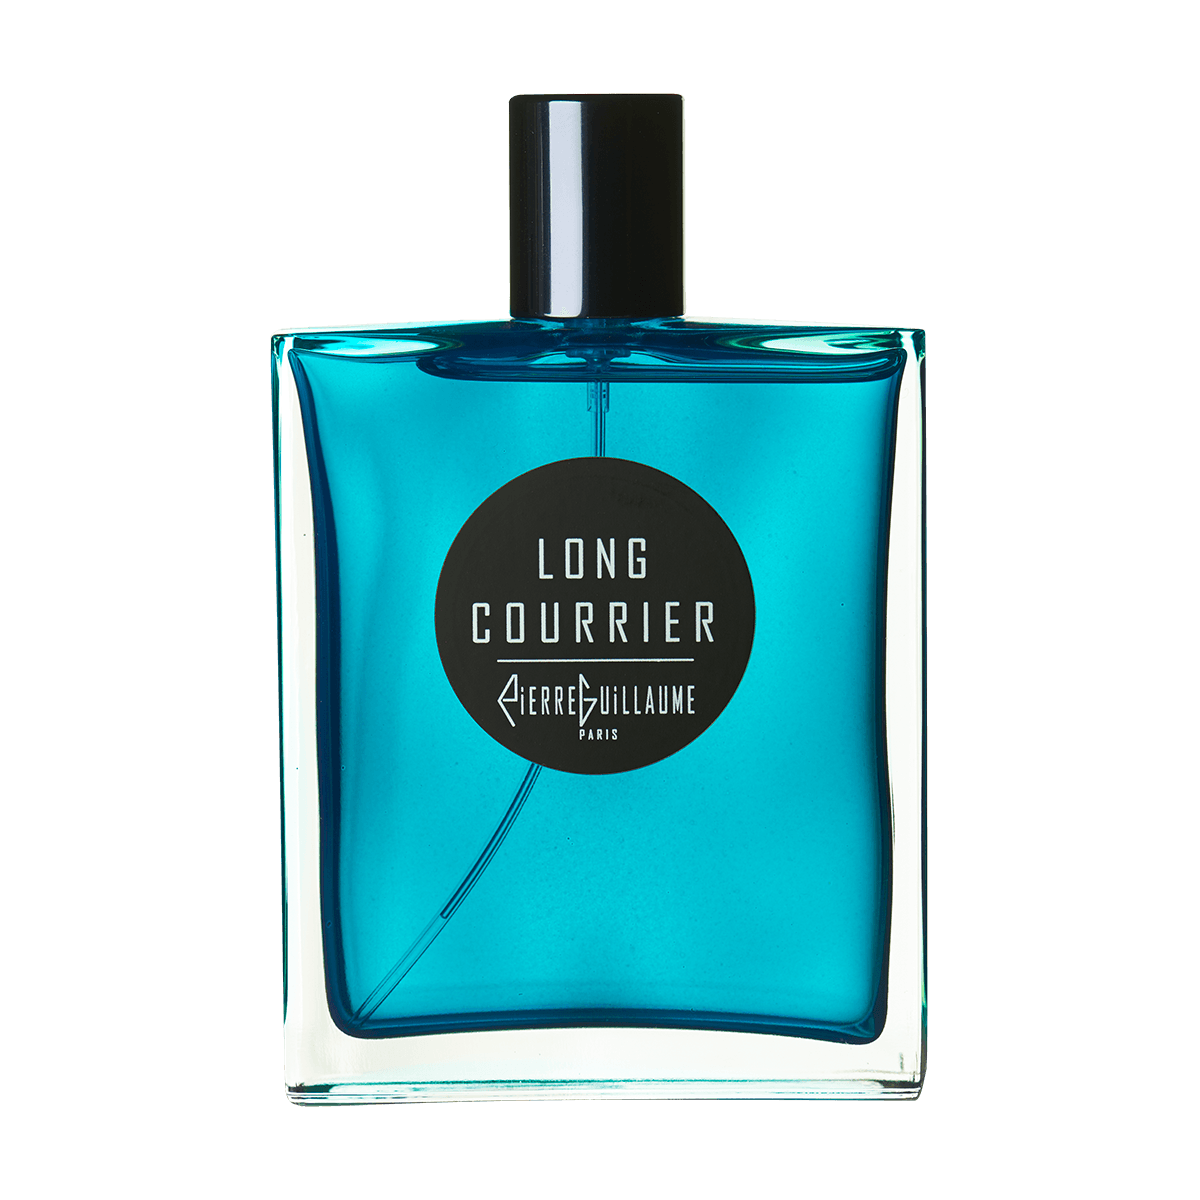 Pierre Guillaume Croisiere - Long-Courrier 100 ml | Perfume Lounge